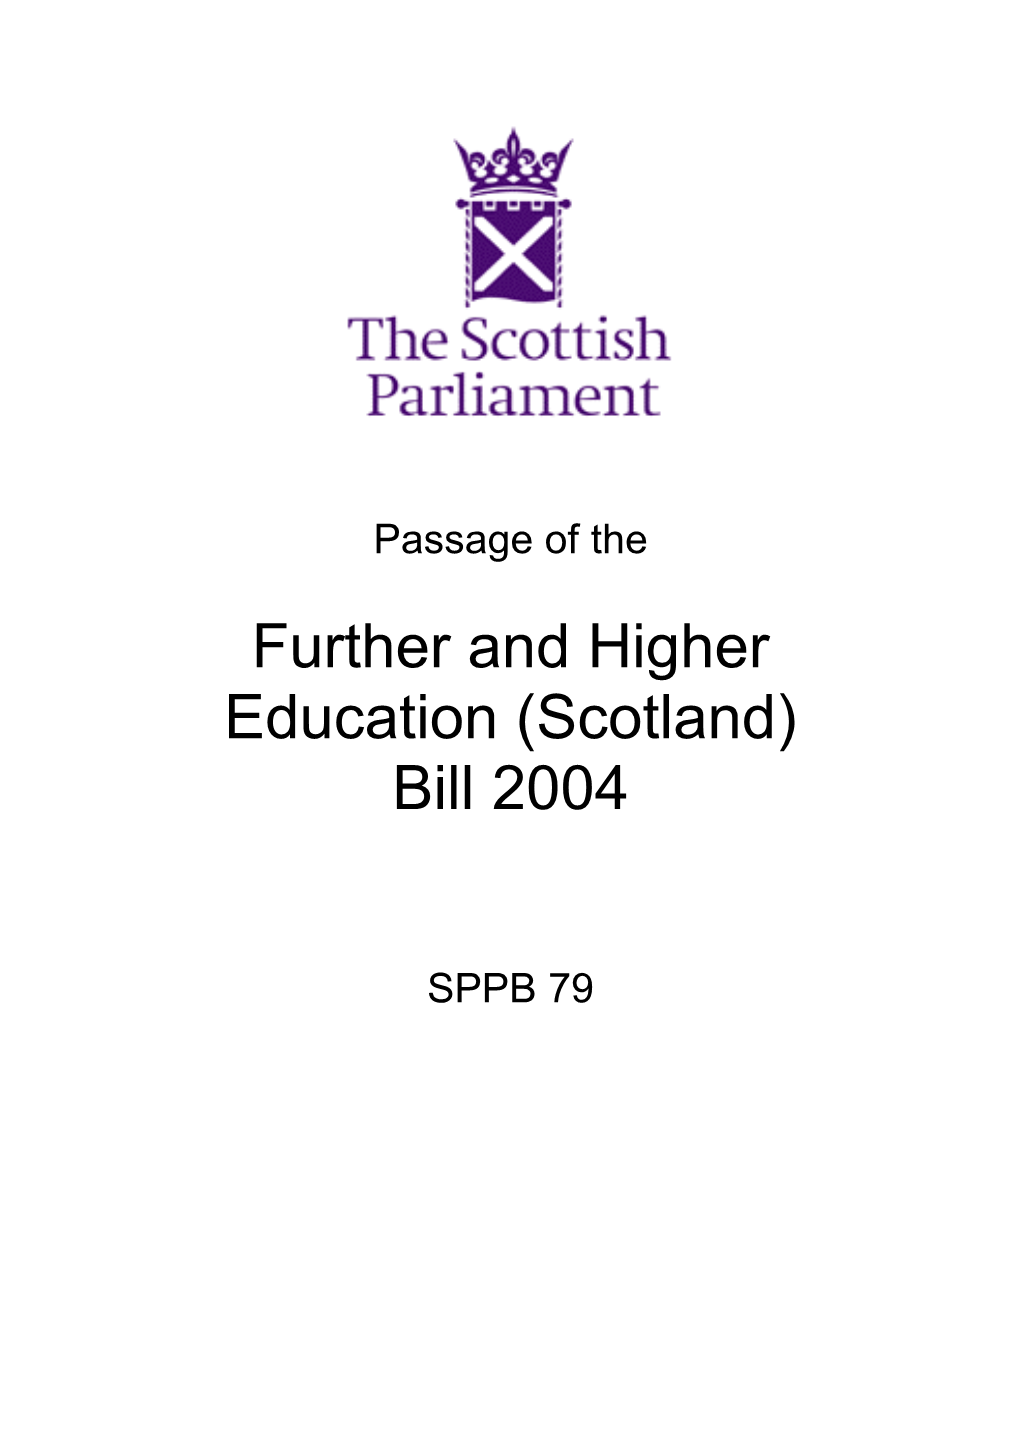 Further and Higher Education (Scotland) Bill 2004